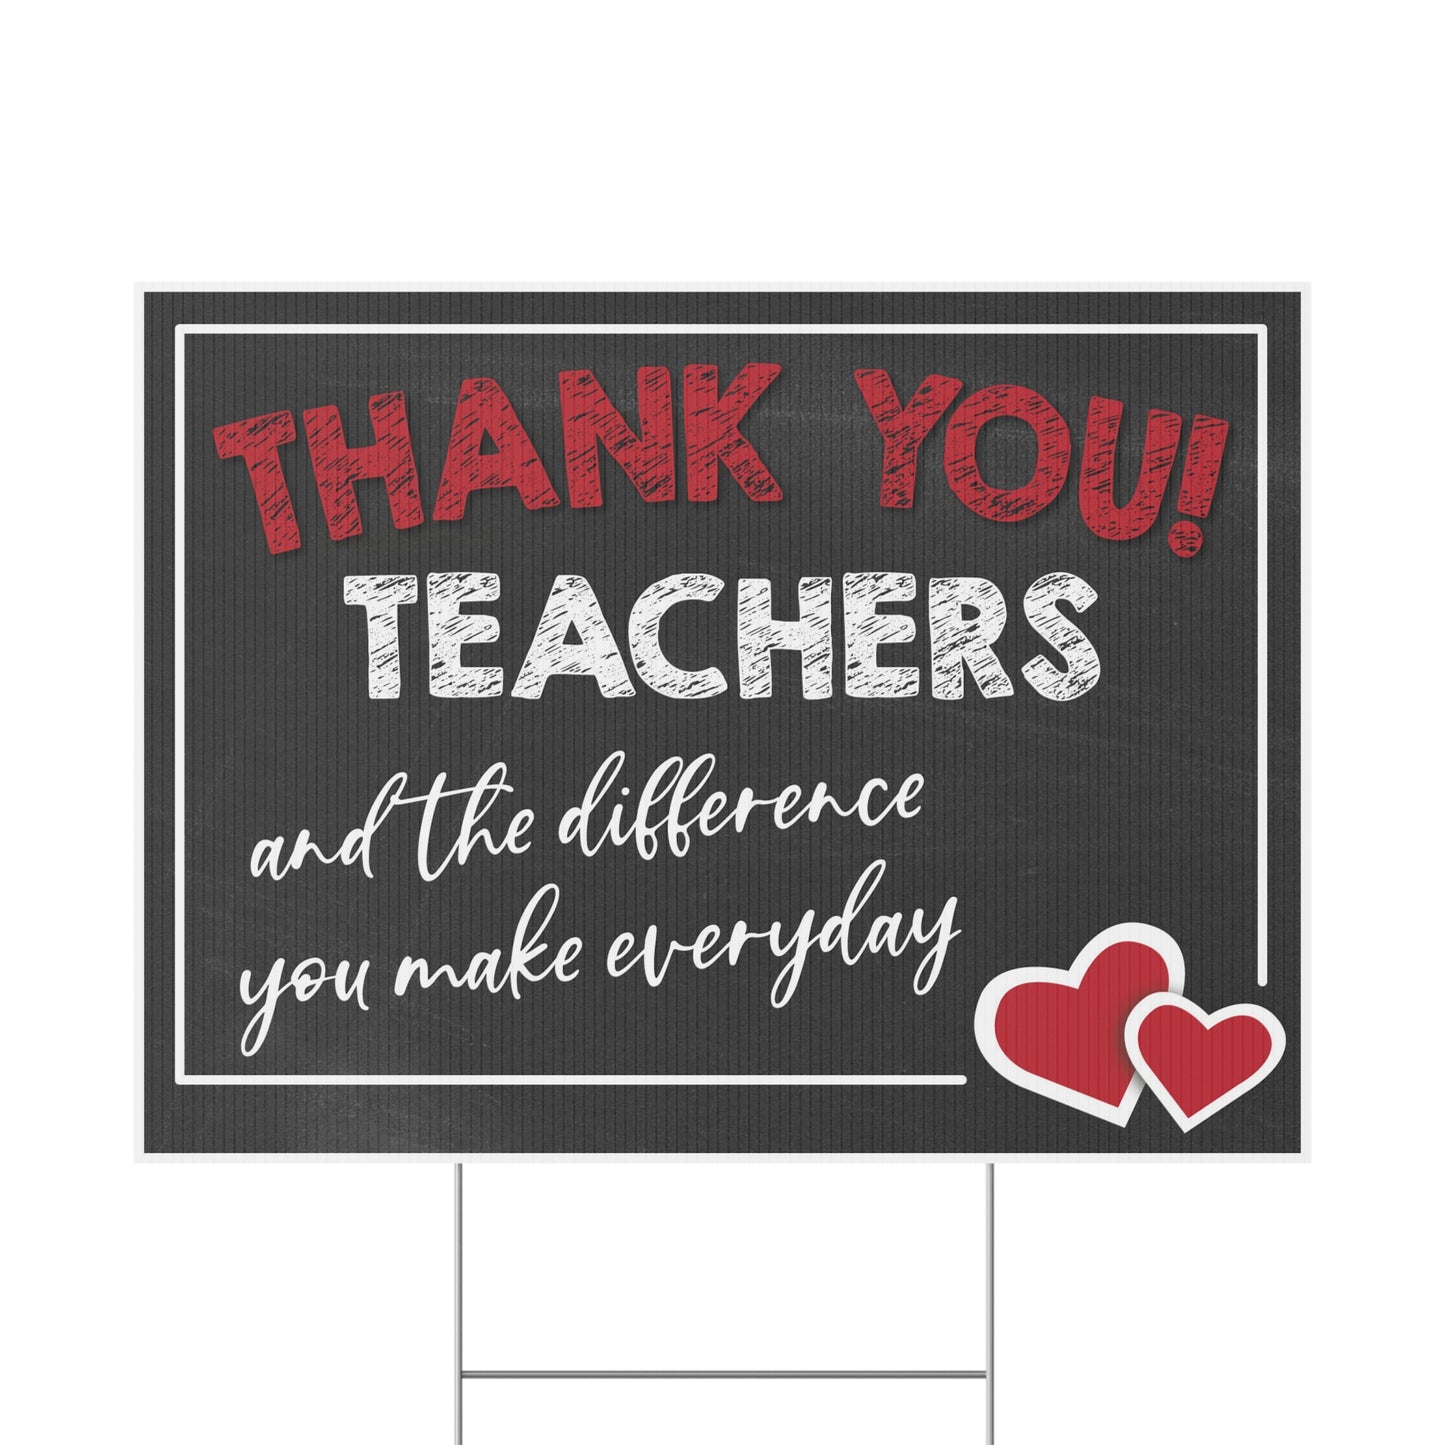 Thank You Teachers, The Difference You Make Everyday, Heart, Yard Sign, Printed 2-Sided -18 x 12,24x18 or 36x24, Metal H-Stake Included, v5